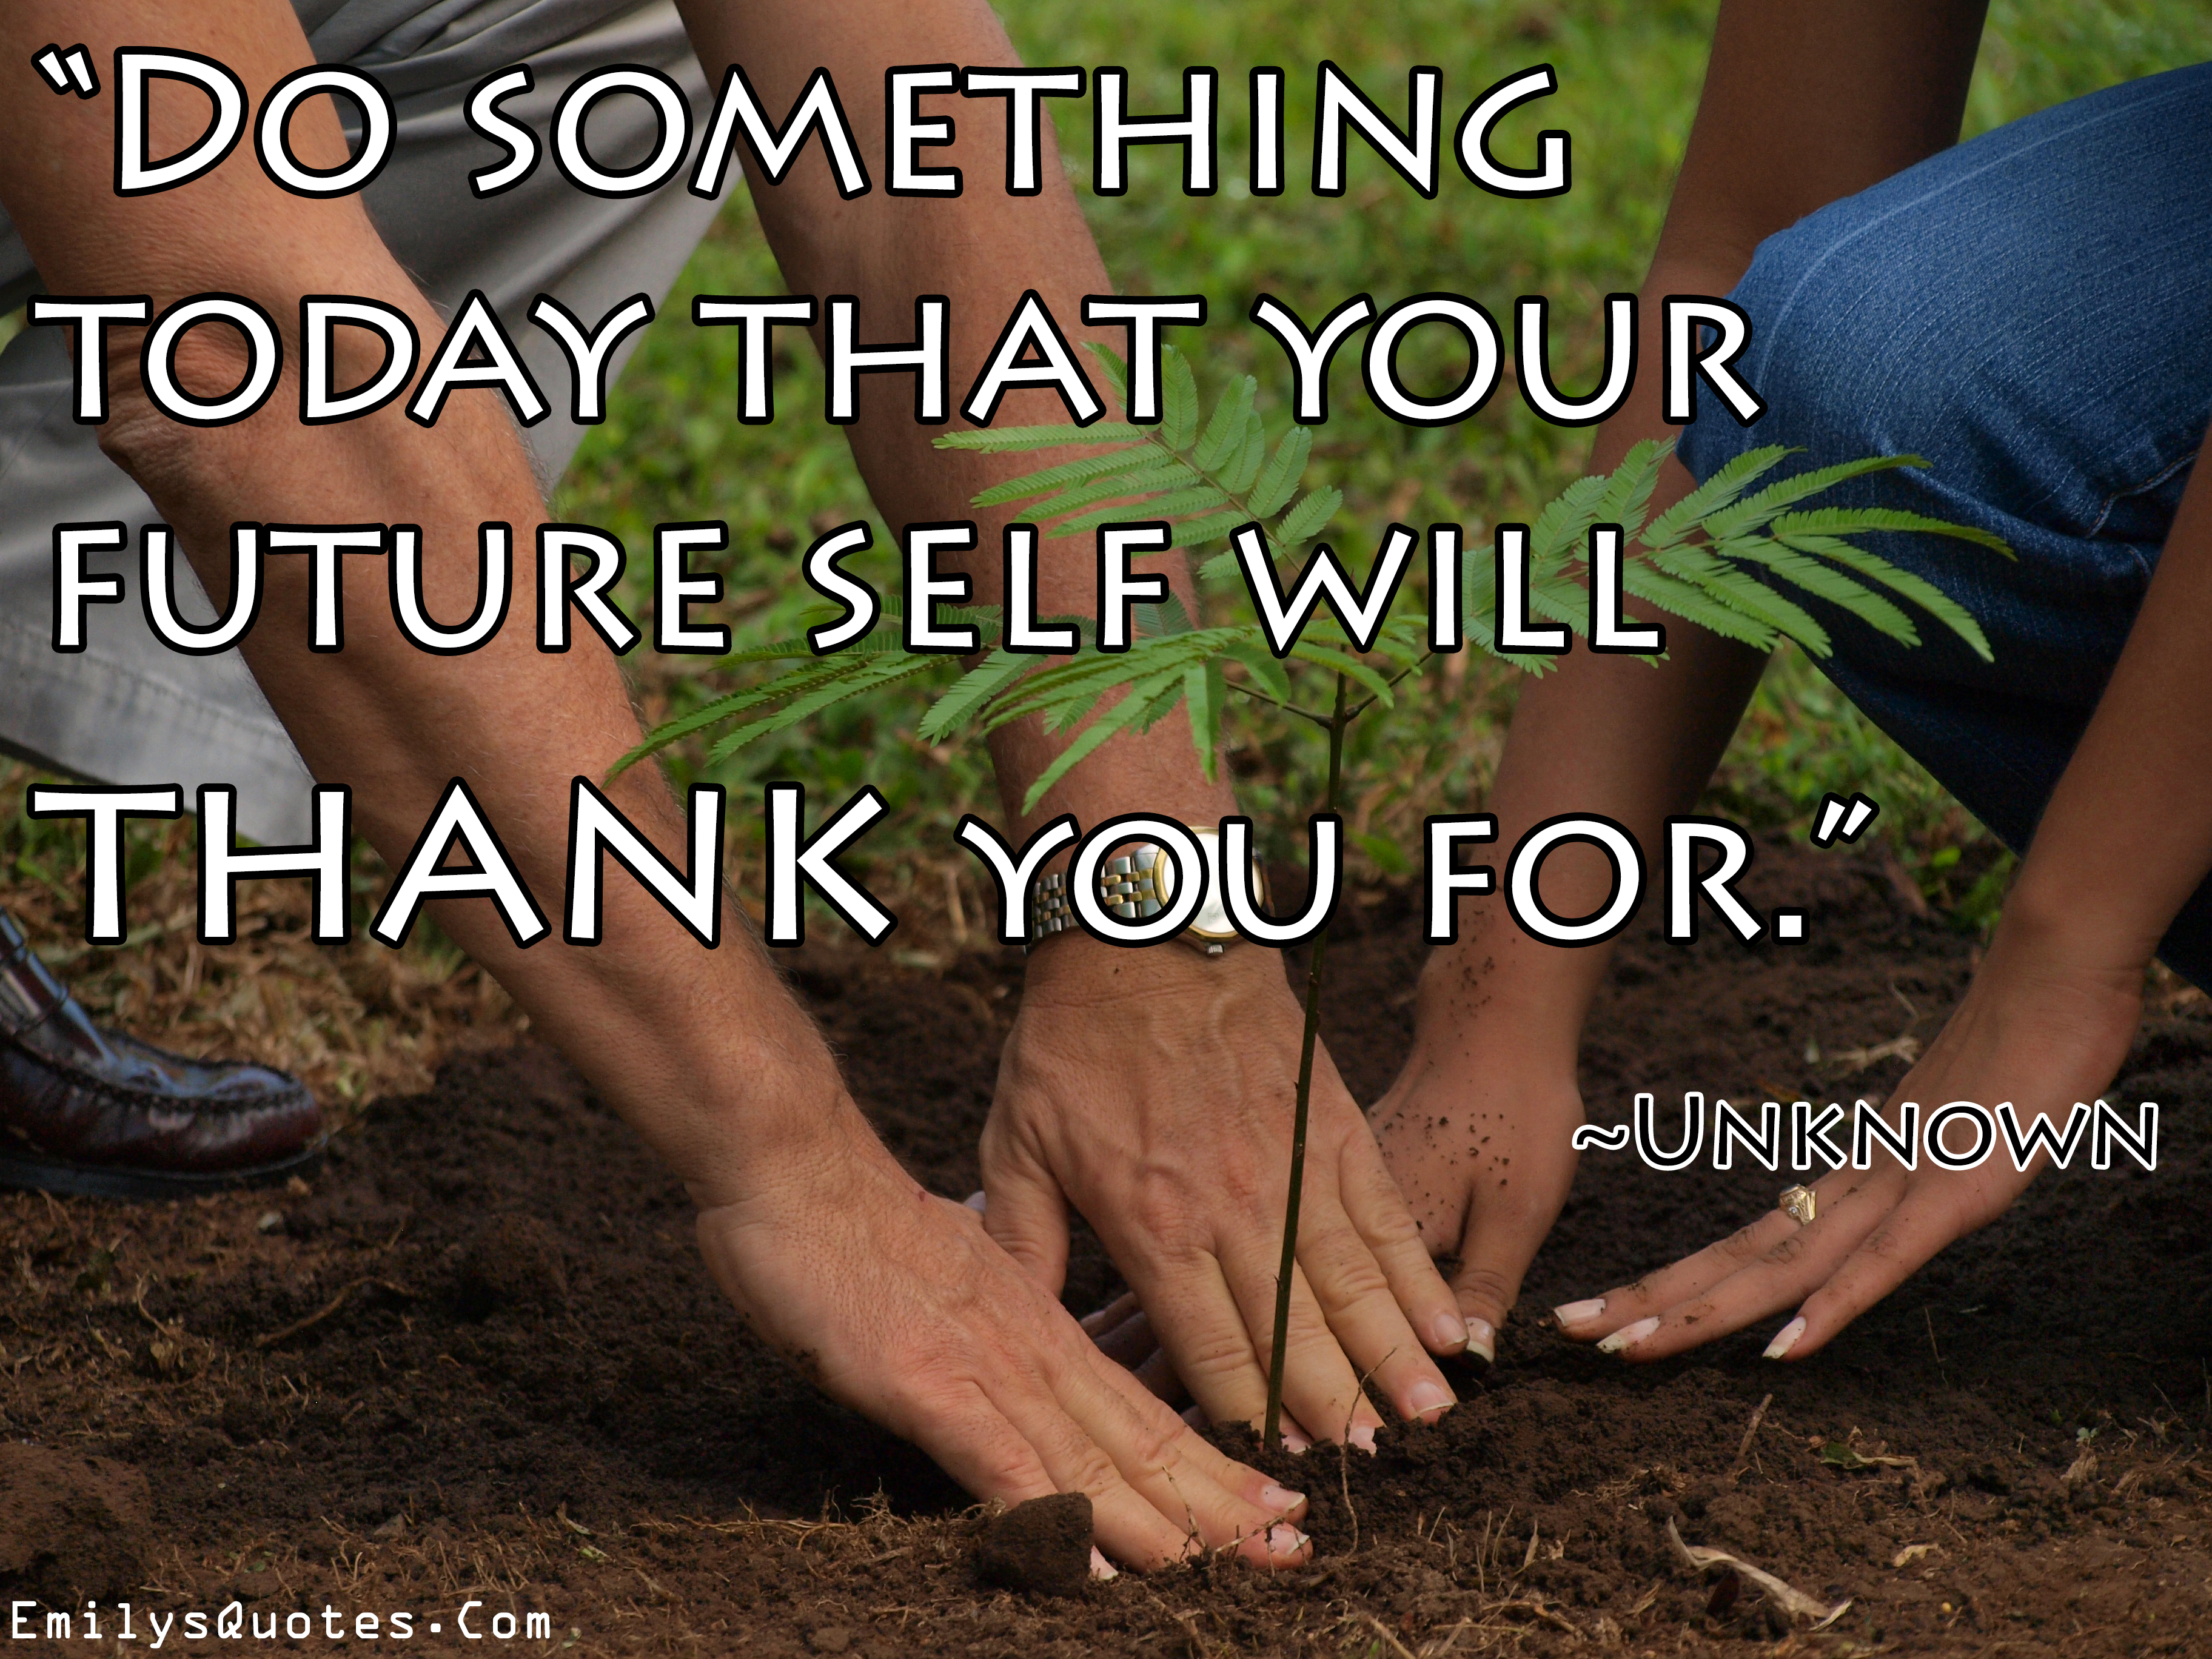 Do something today that your future self will thank you